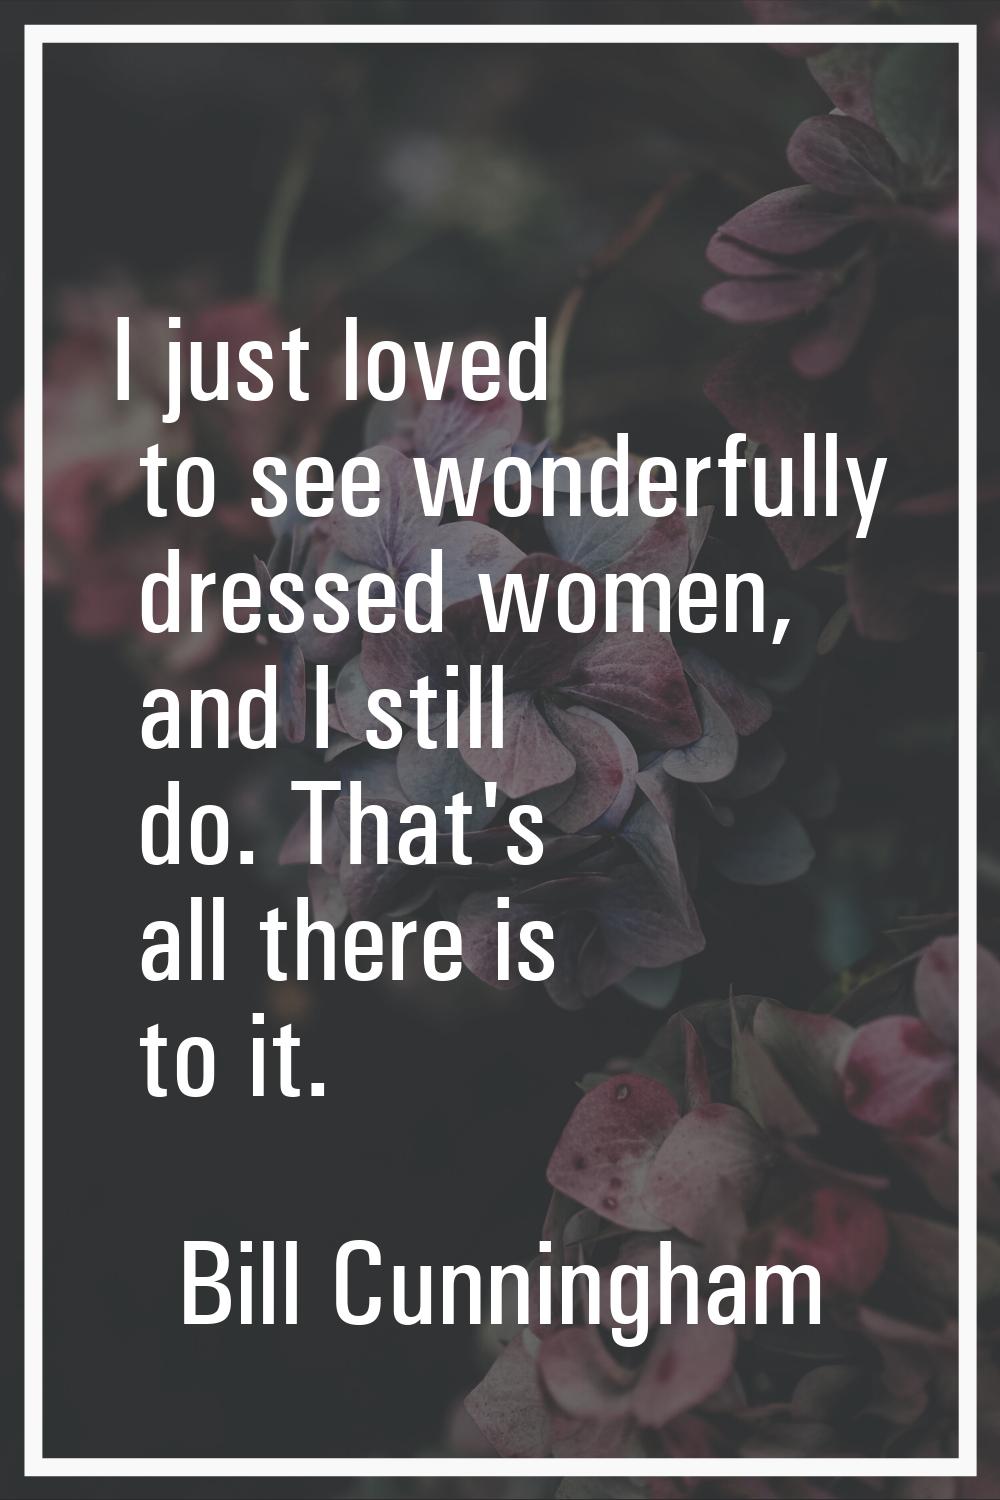 I just loved to see wonderfully dressed women, and I still do. That's all there is to it.